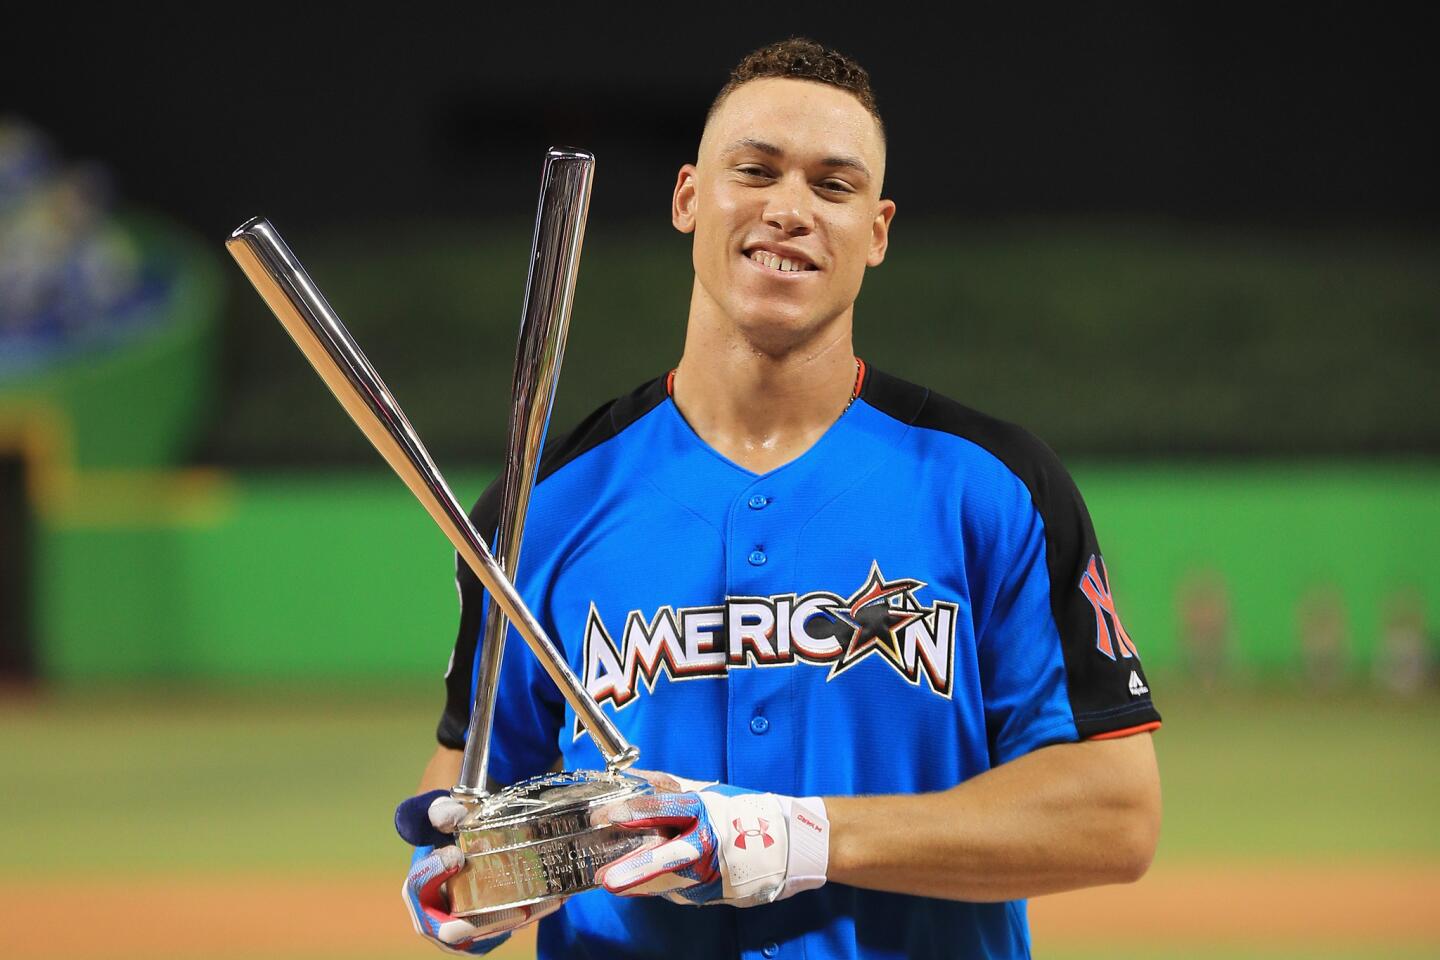 Bellinger Impresses, but Falls Short in 2017 Home Run Derby – Think Blue  Planning Committee